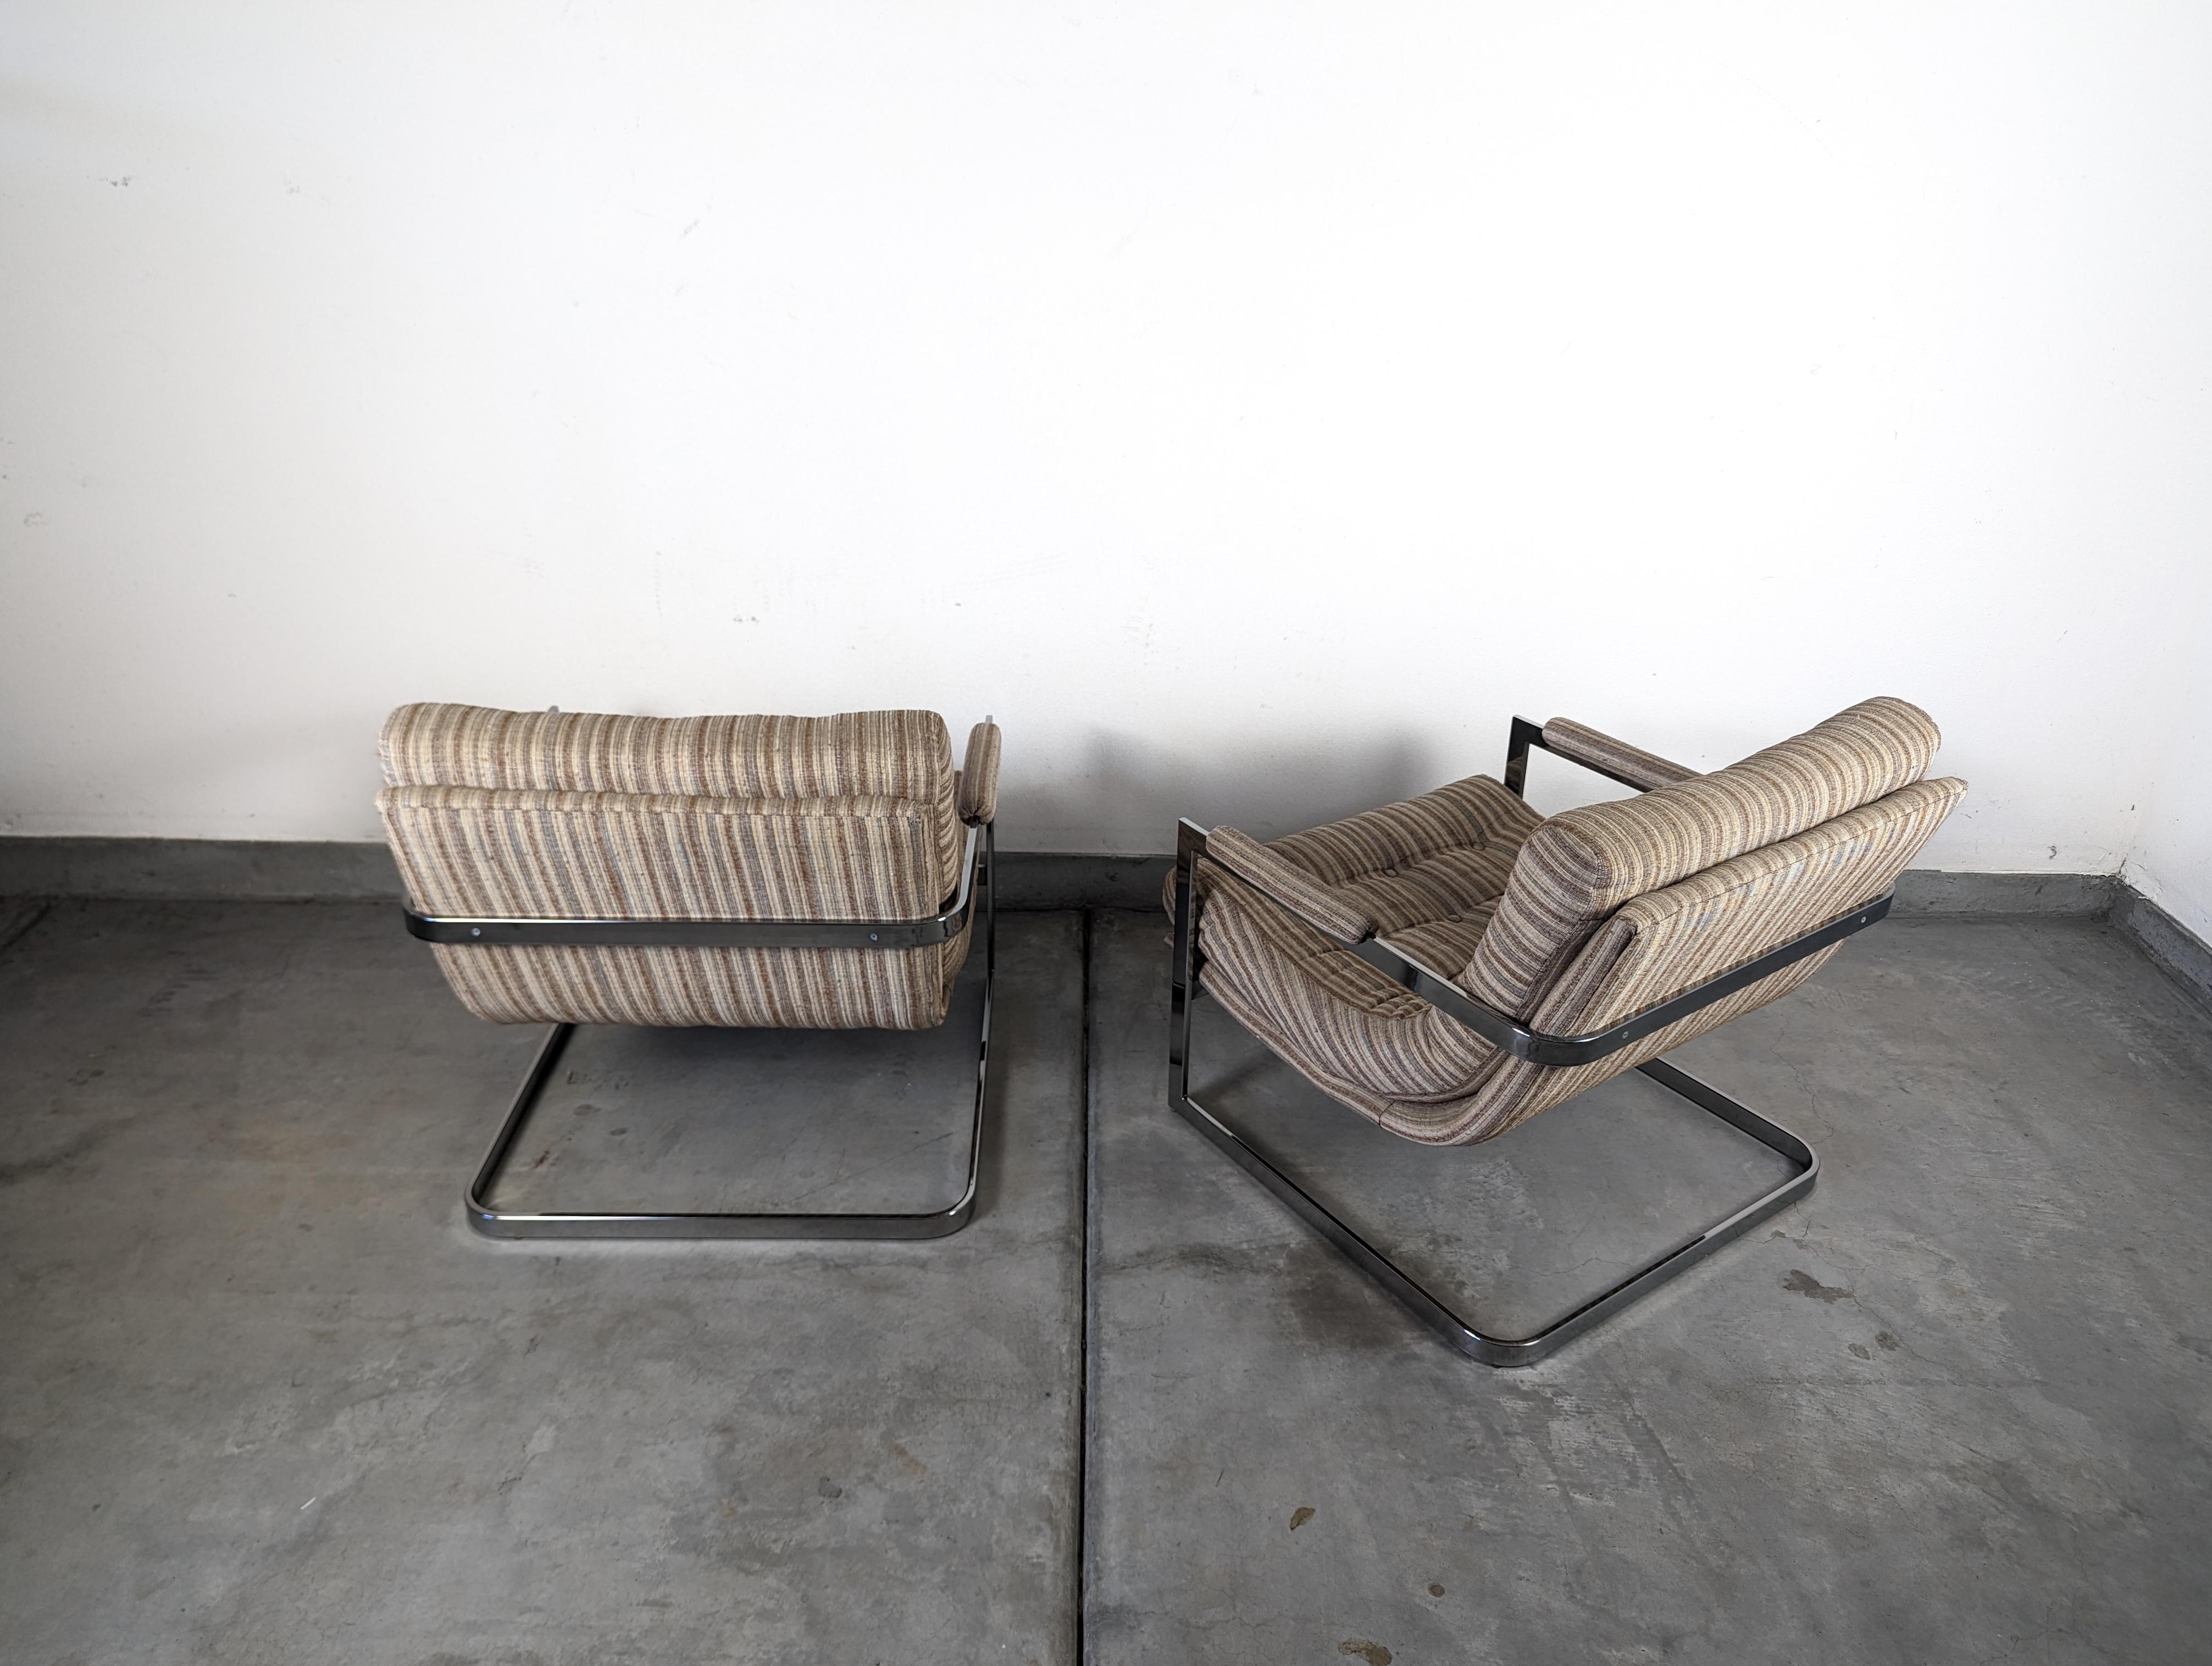 Presenting an exceptional pair of vintage mid-century cantilevered scoop chairs in the manner of Milo Baughman, a pioneer of the mid-century modern design era. These iconic pieces, dating back to the 70s/80s, evoke a timeless elegance that resonates